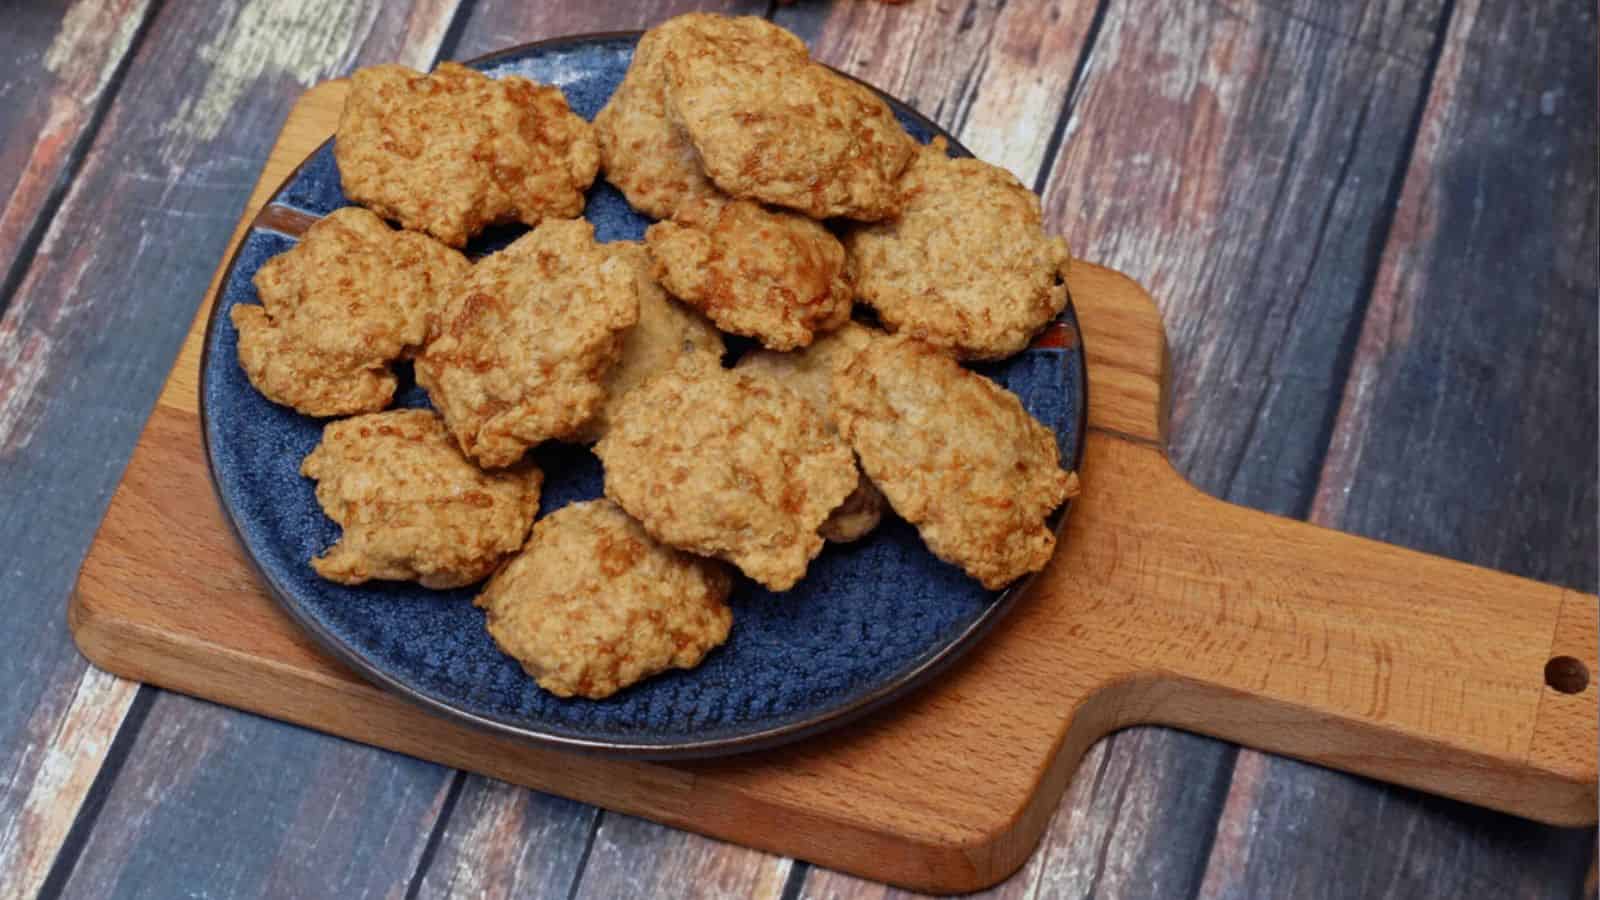 Plate of chicken nuggets on a wooden serving board.